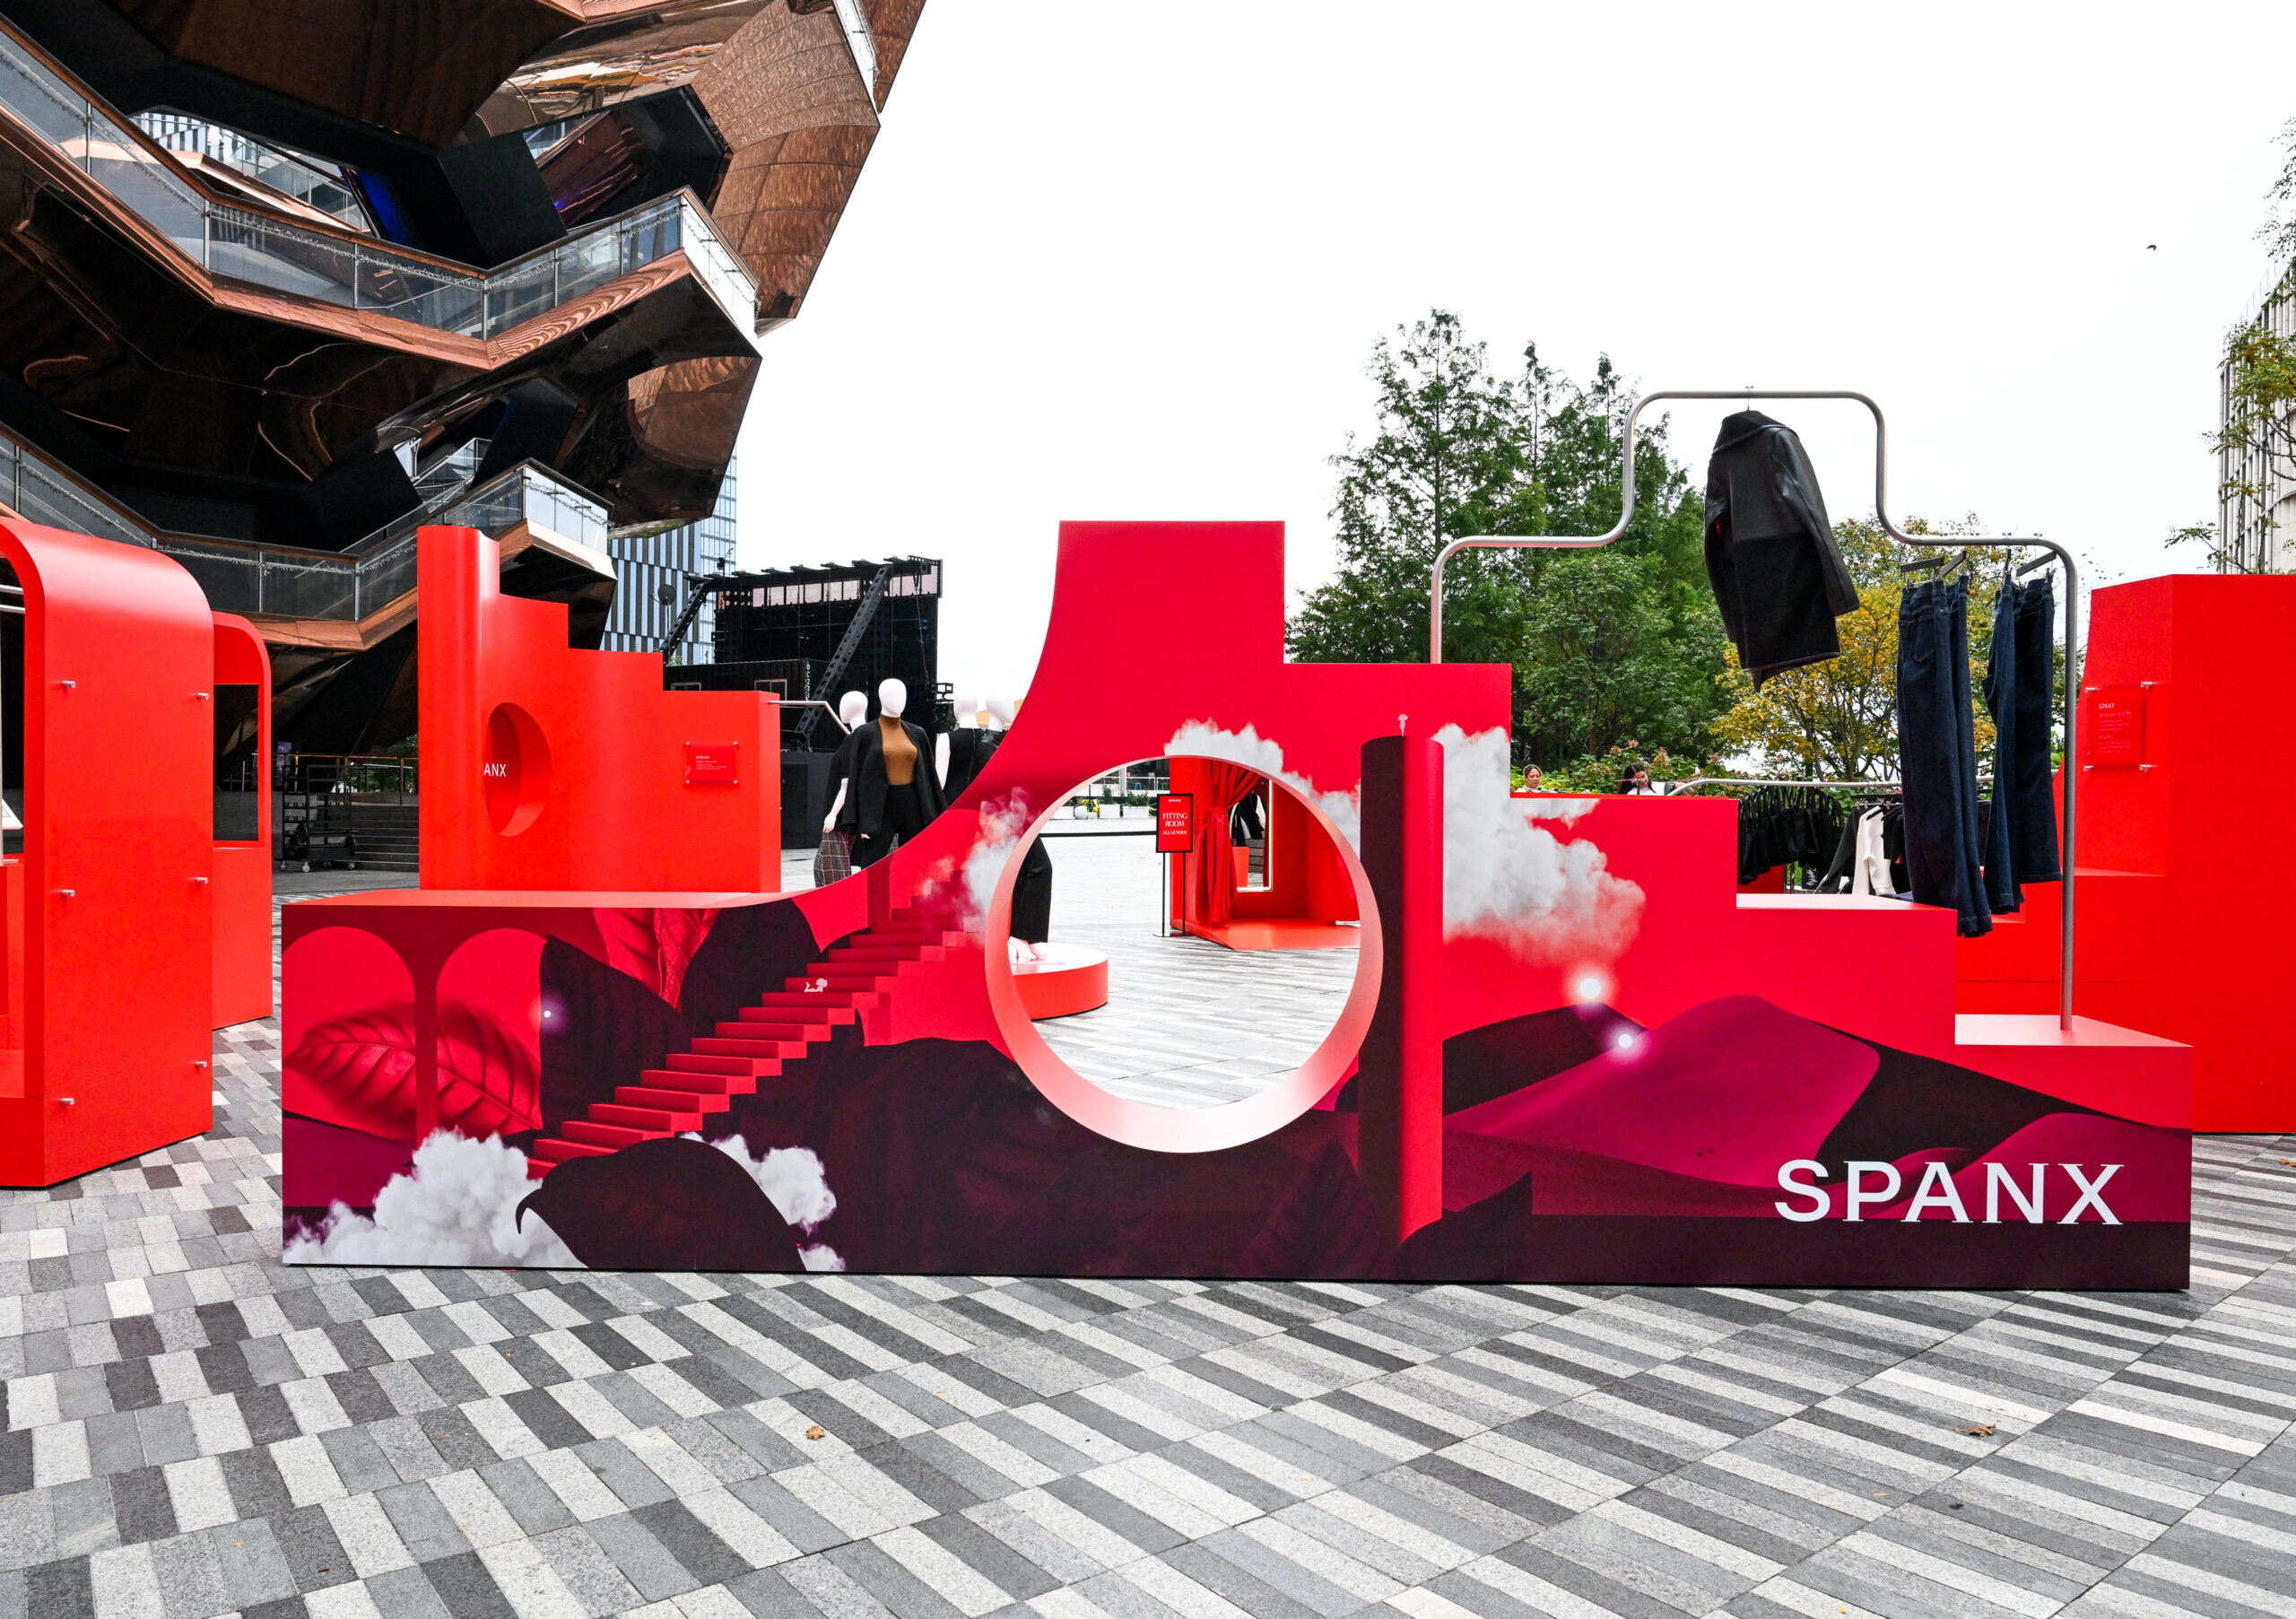 Spanx launches pop-up series in New York, D.C., and Miami ahead of